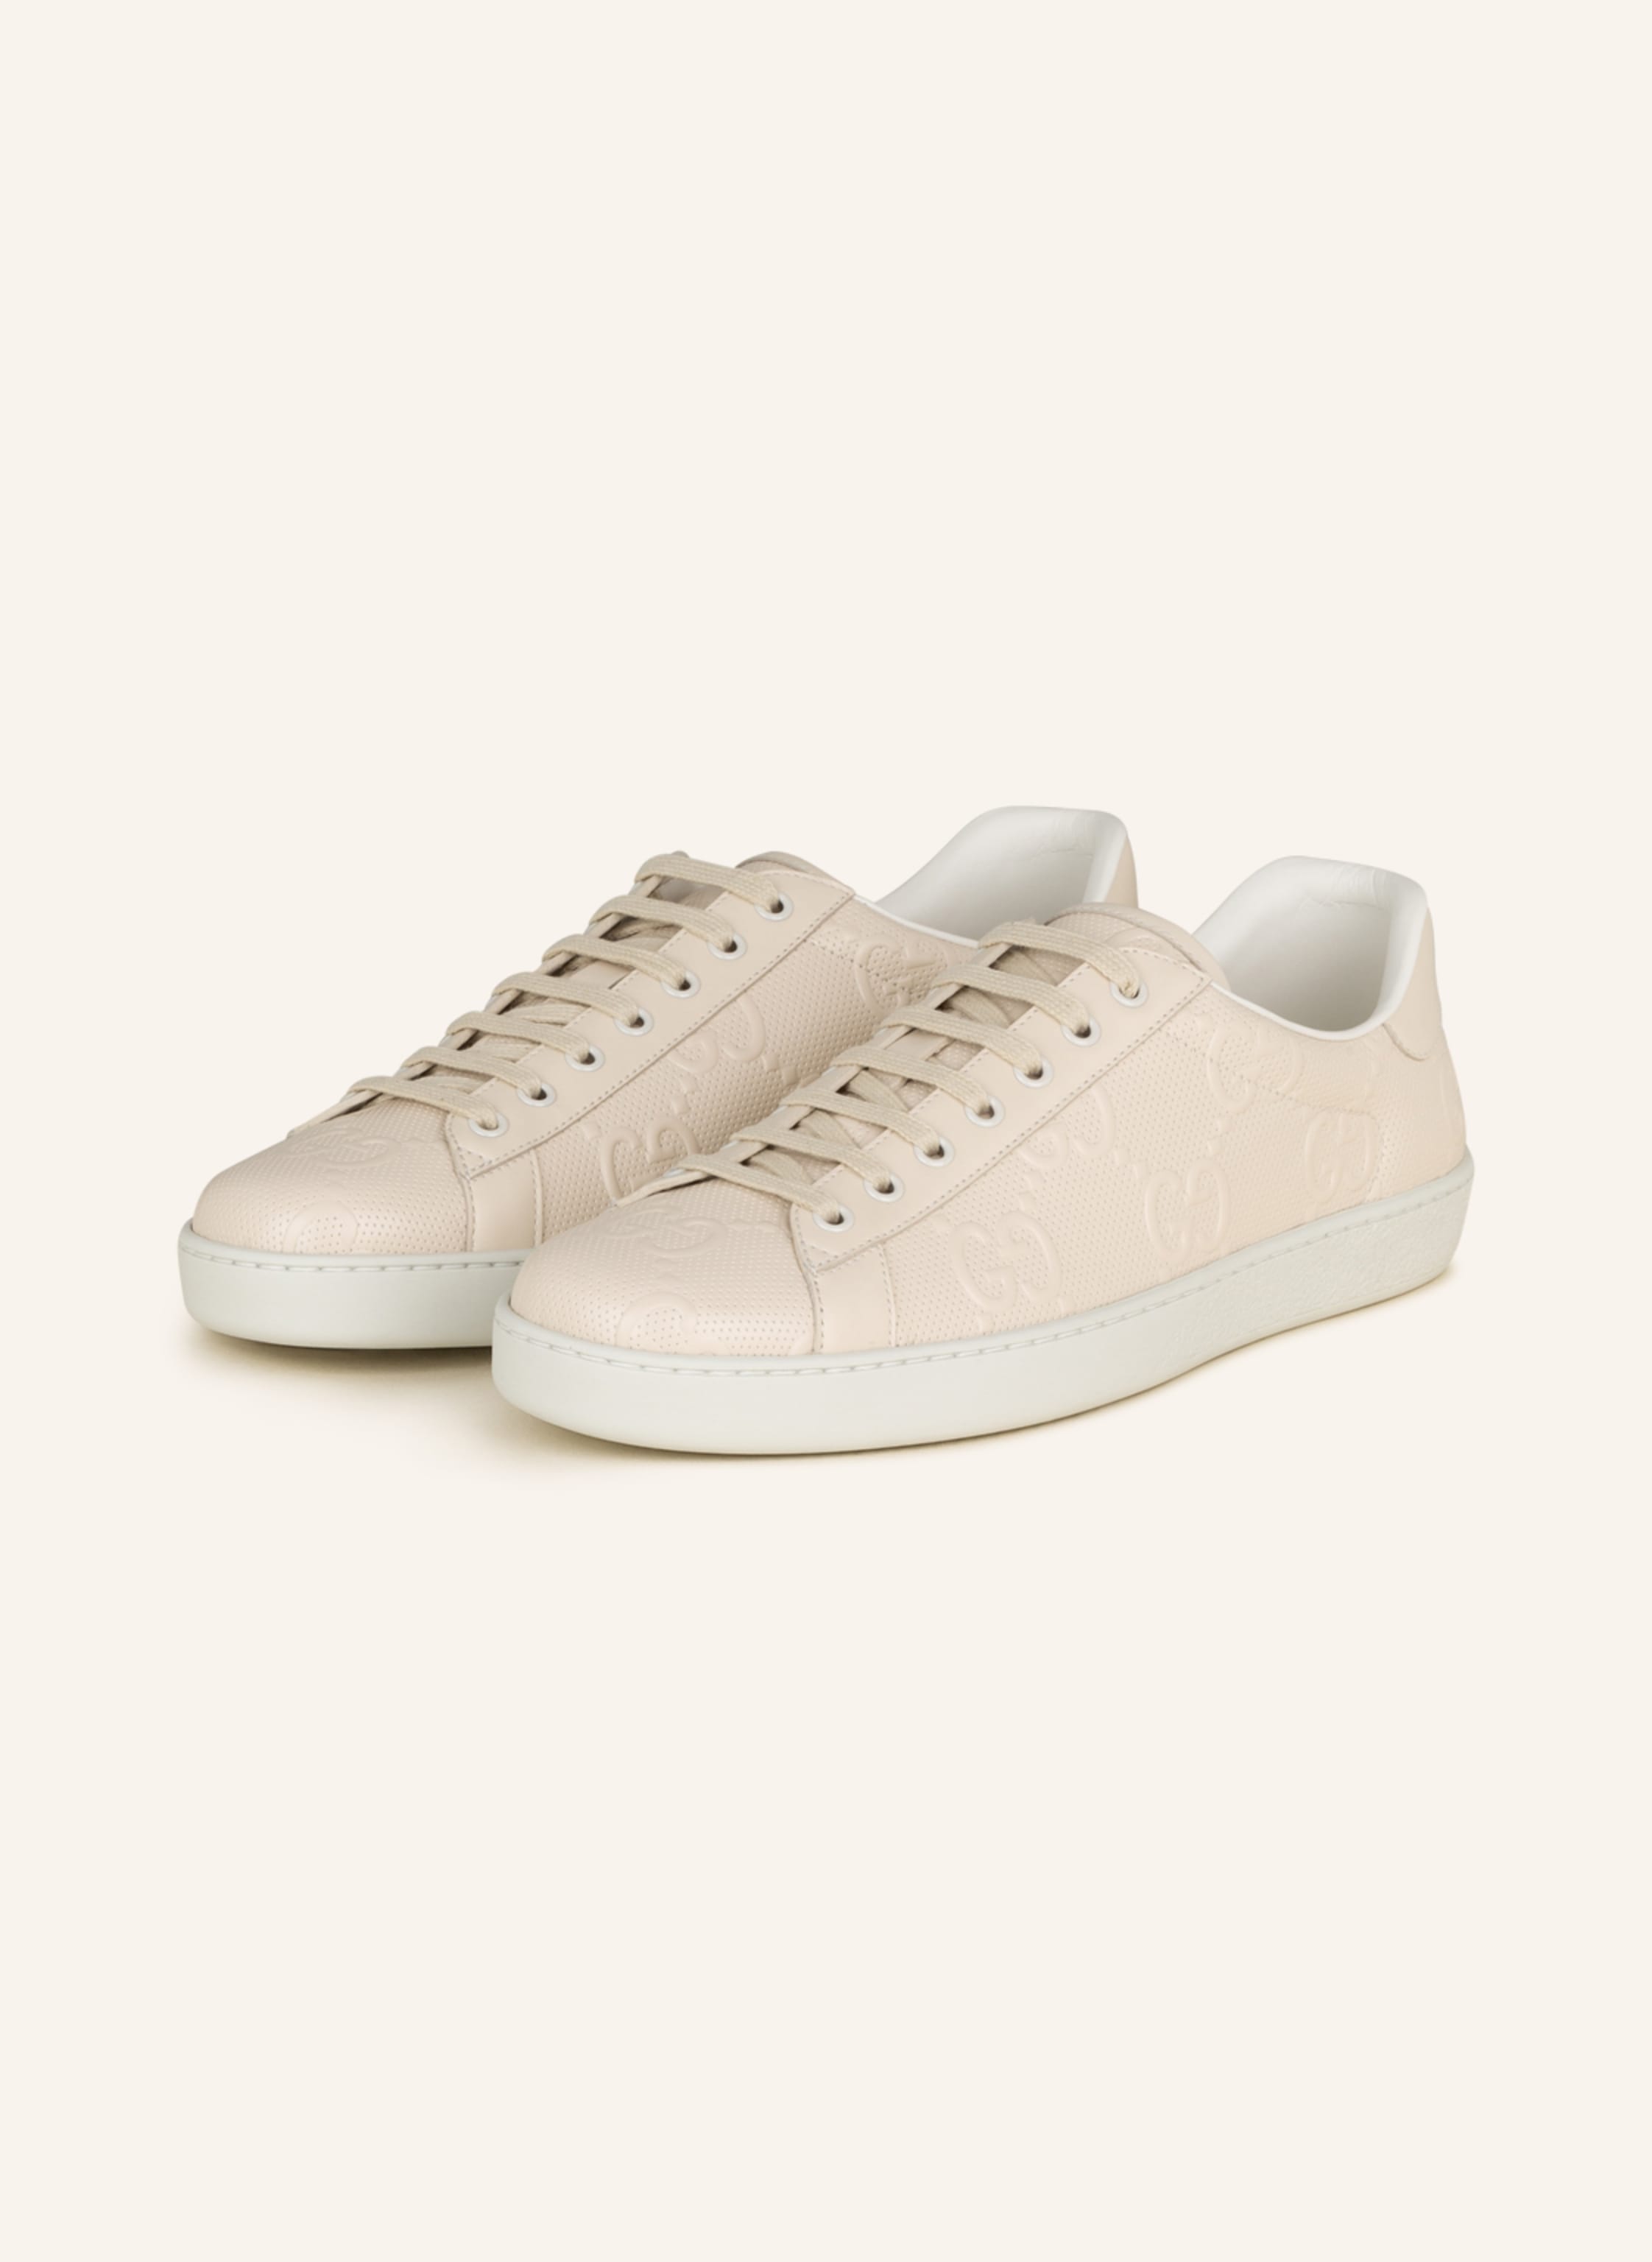 32 Gucci Ace ideas  gucci ace sneakers, gucci sneakers outfit